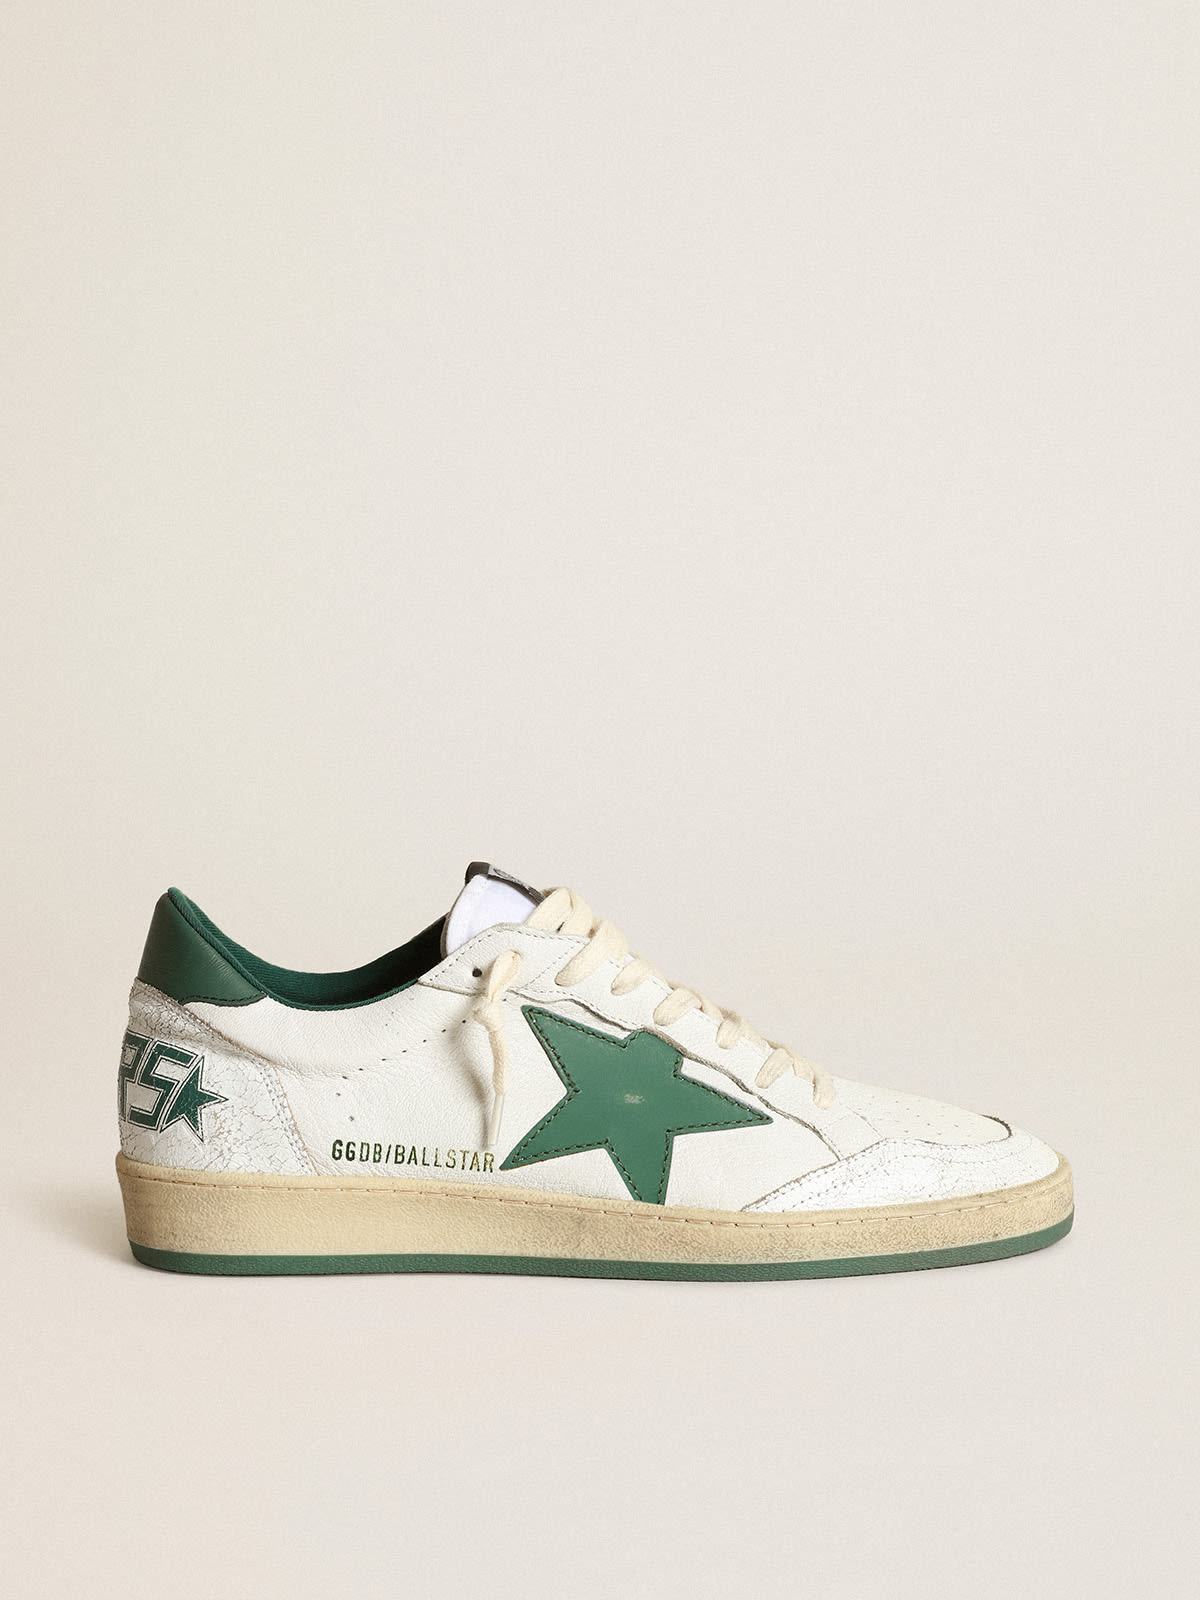 Ball Star sneakers in white nappa leather with green leather star and heel tab